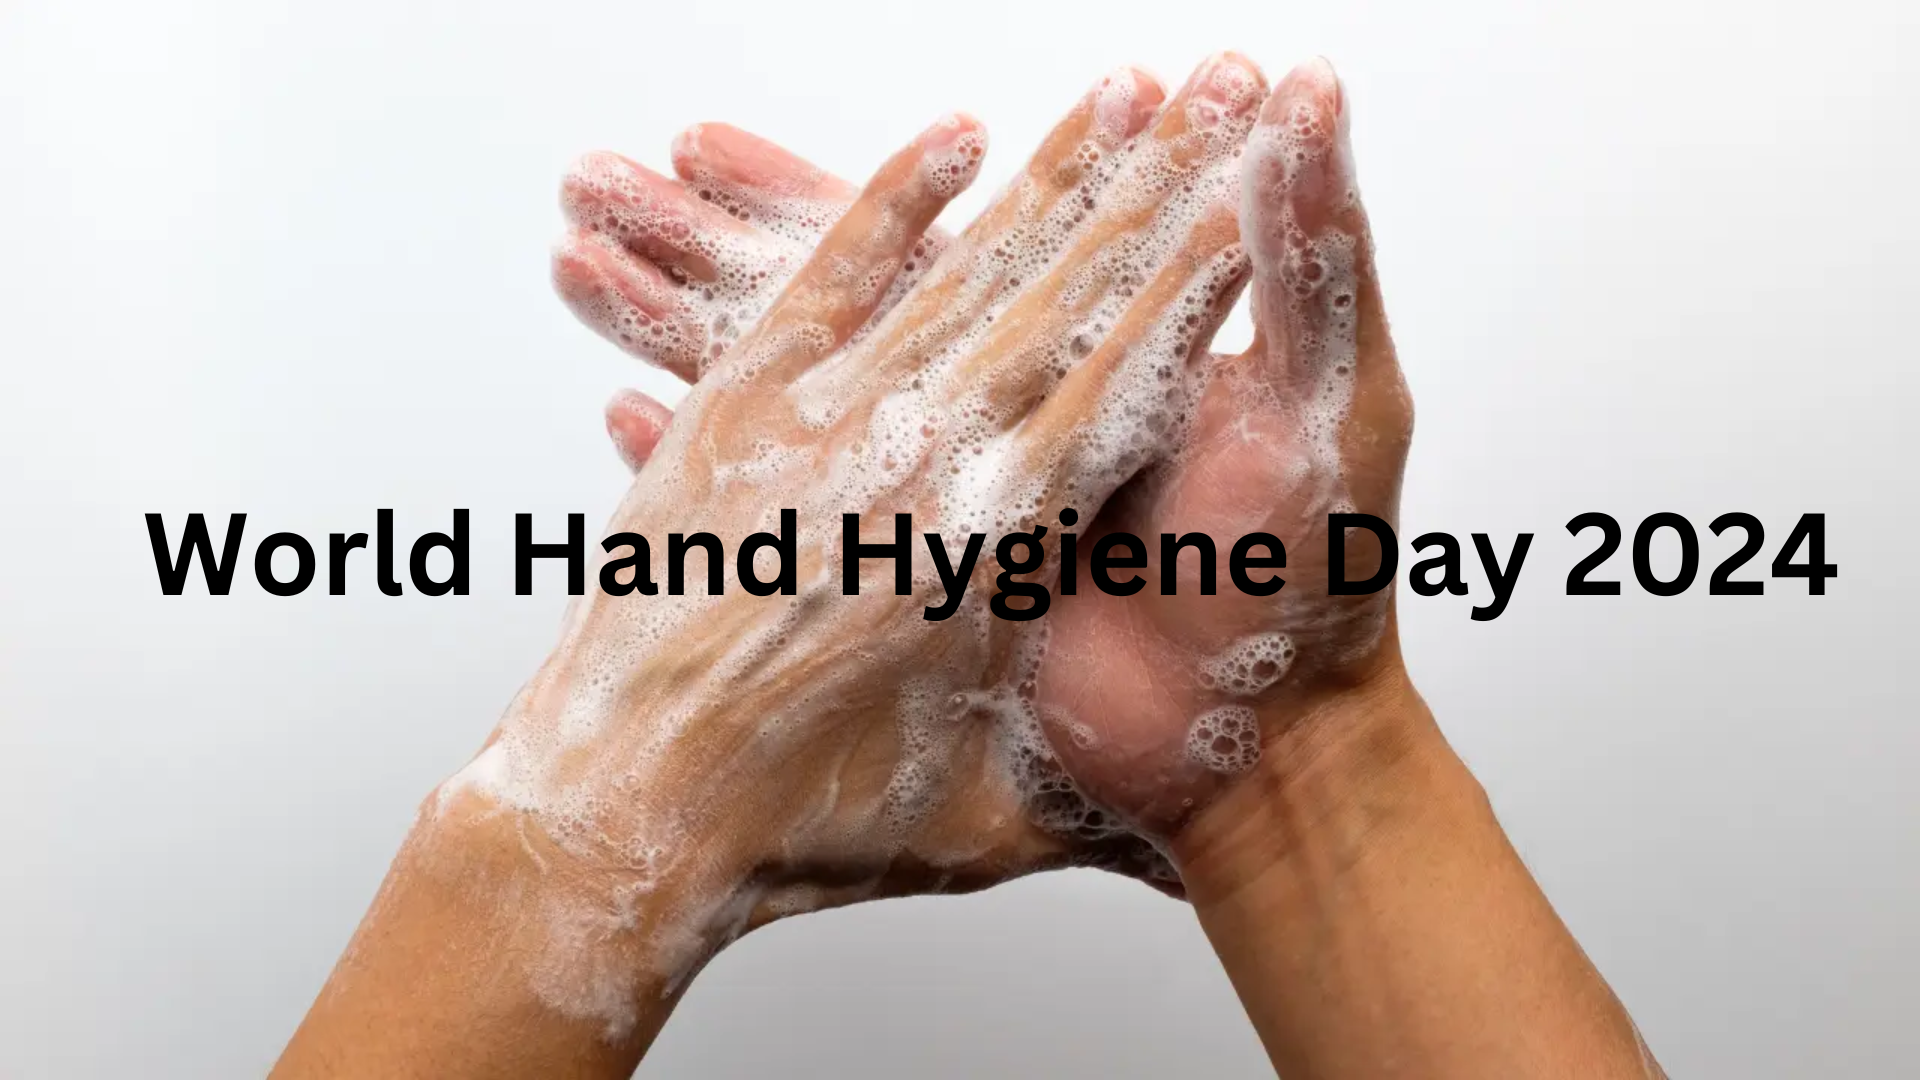 World Hand Hygiene Day 2024: All You Need To Know